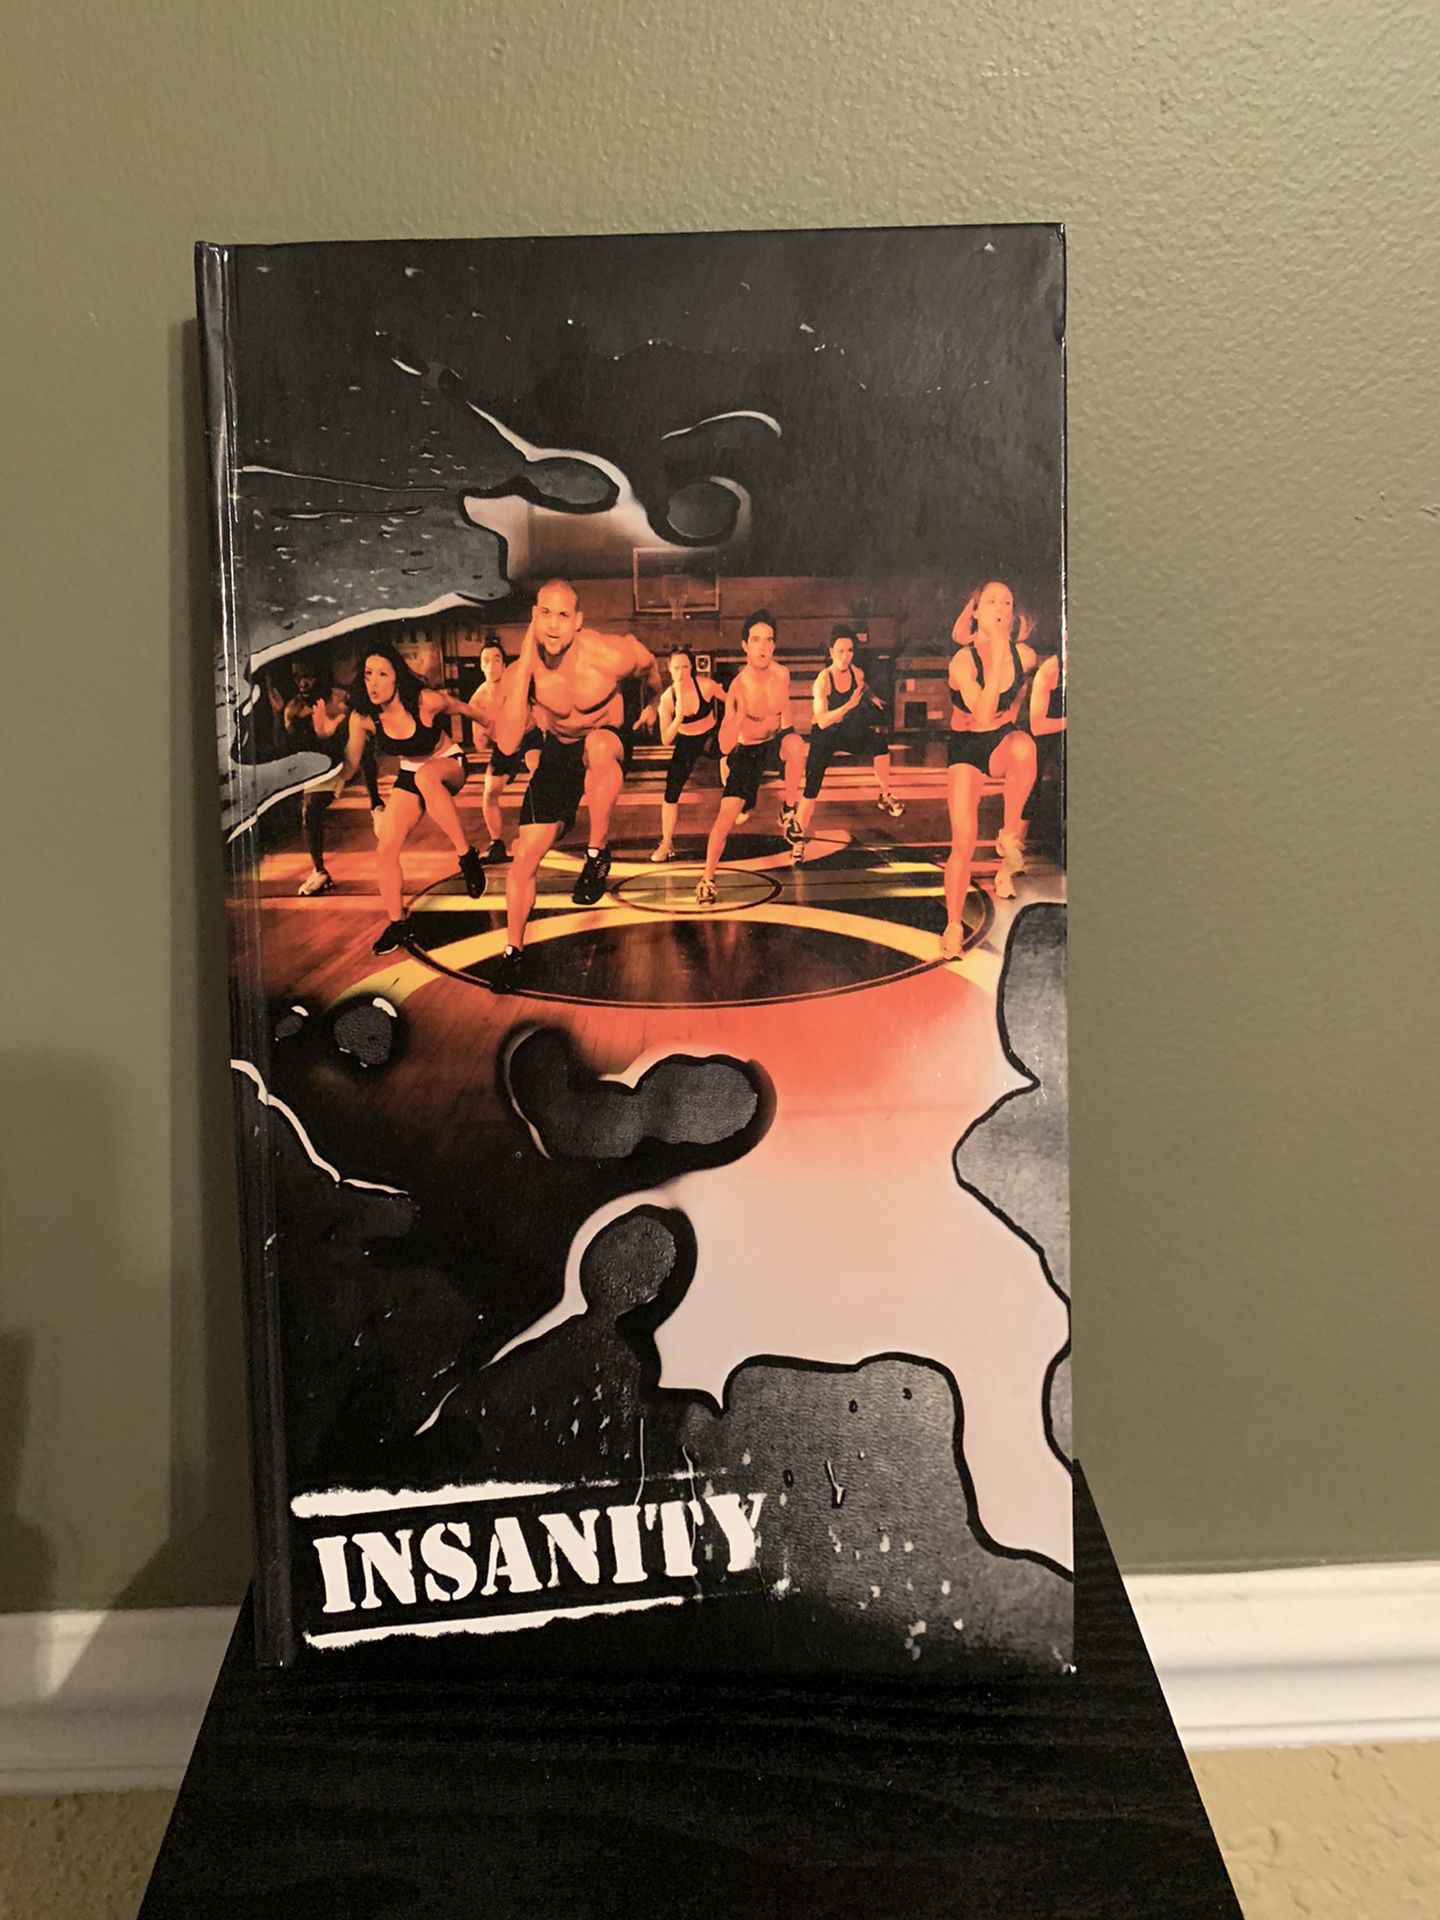 Insanity by Shaun T workout DVDs